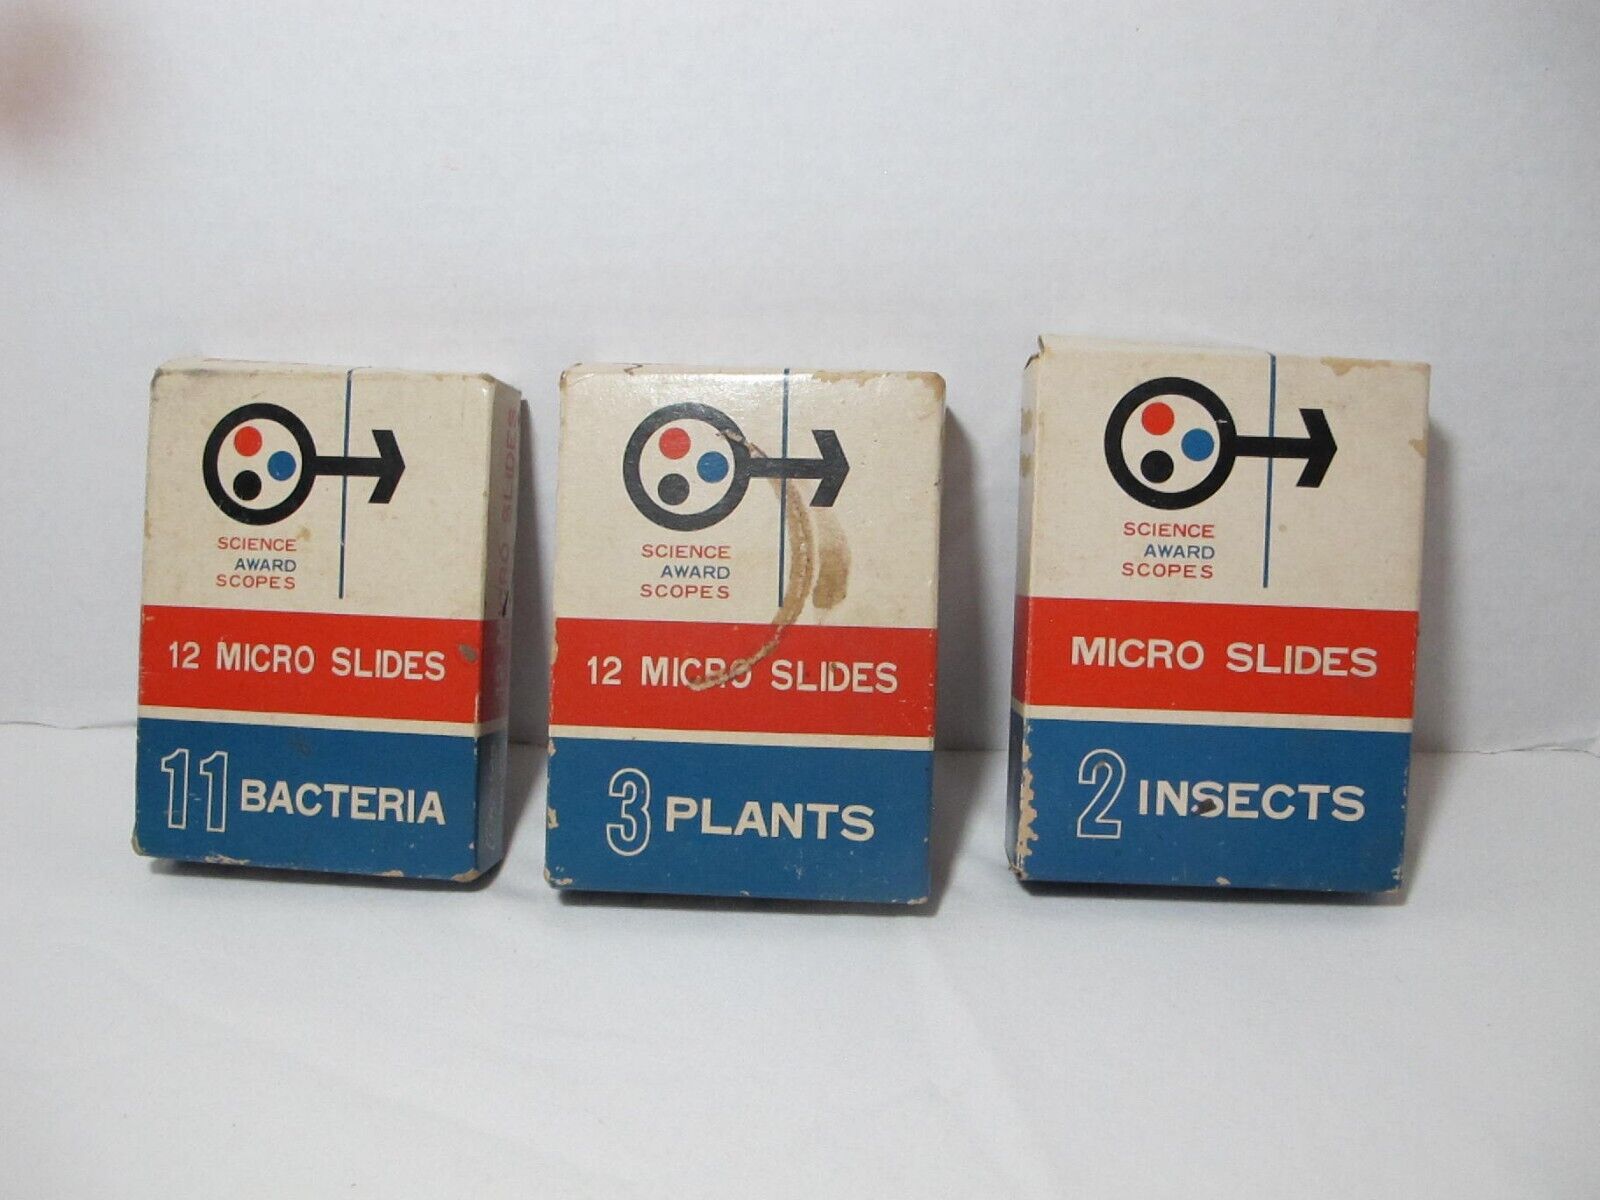 Vtg 3pc Cragstan Micro Slides Boxes Insects Plants Bacteria Science Award Scopes